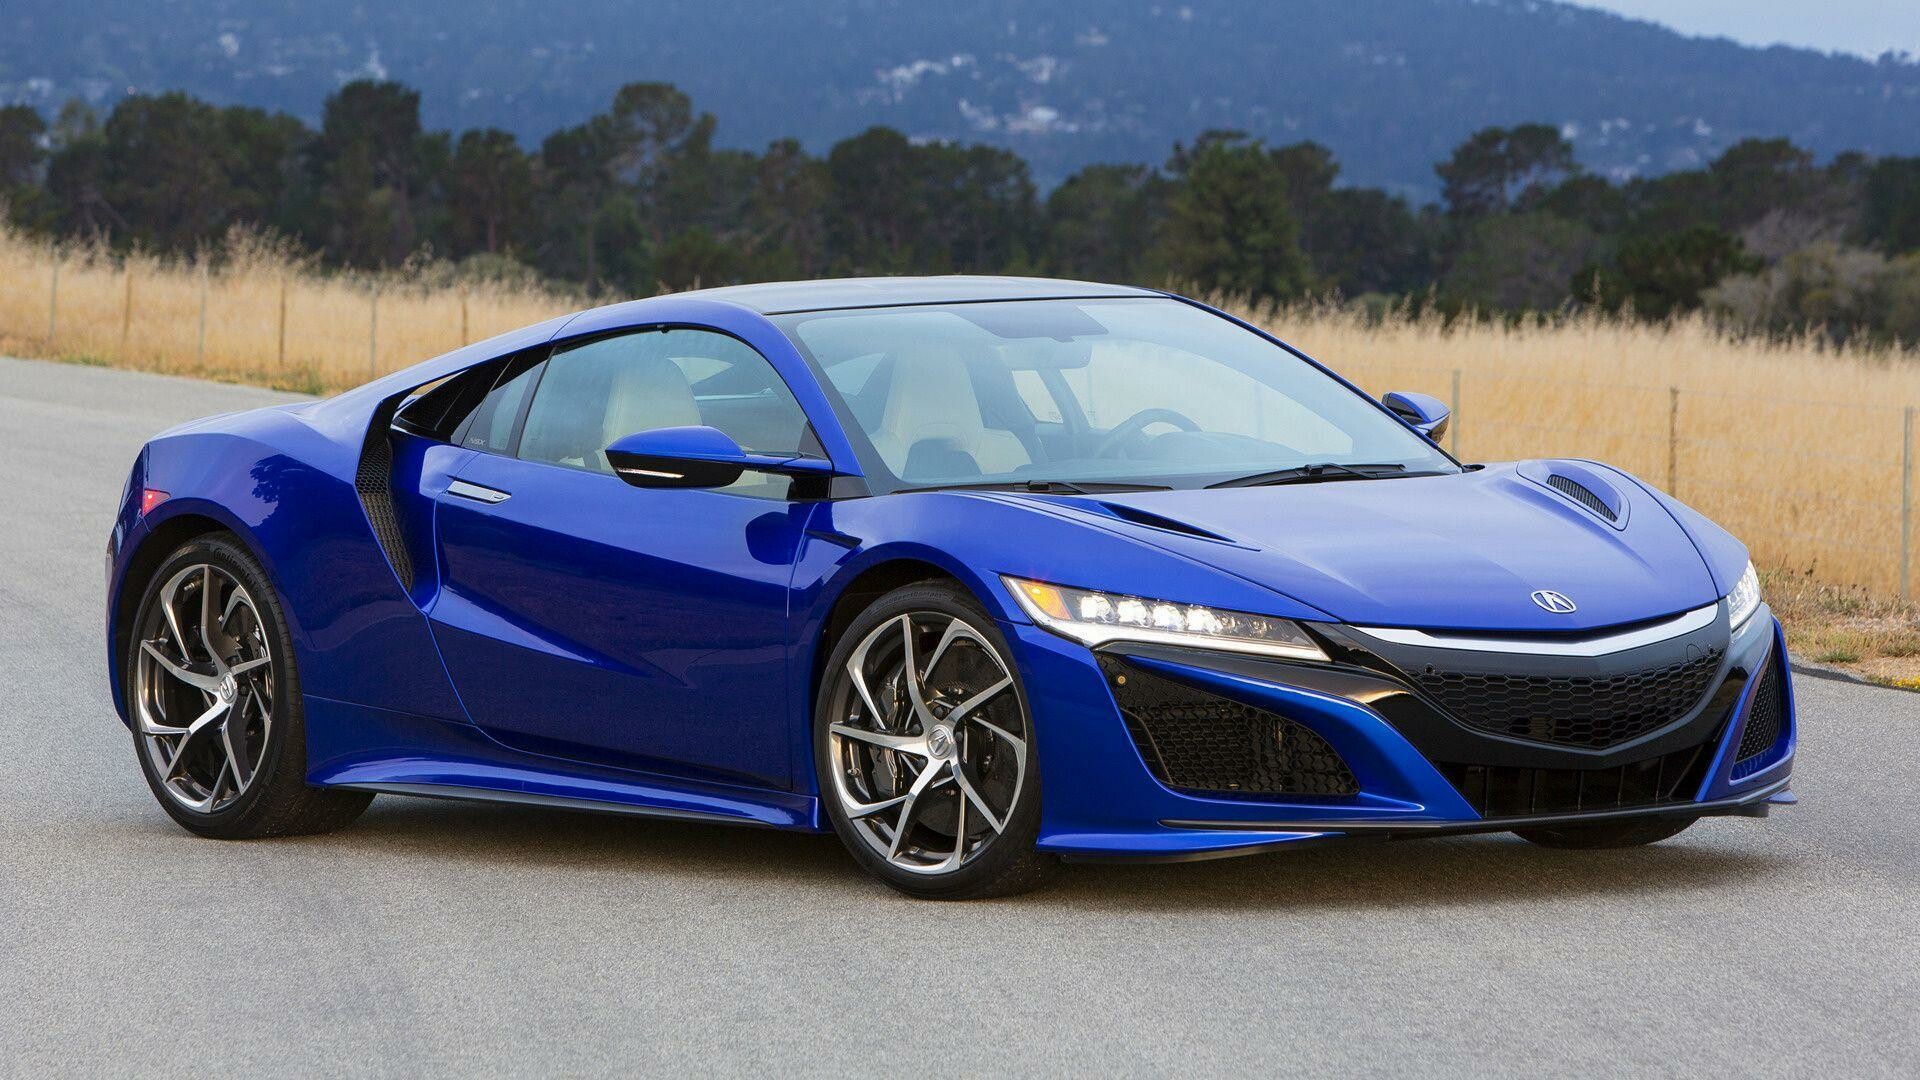 Blue Acura NSX, Top free backgrounds, 1920x1080 Full HD Desktop